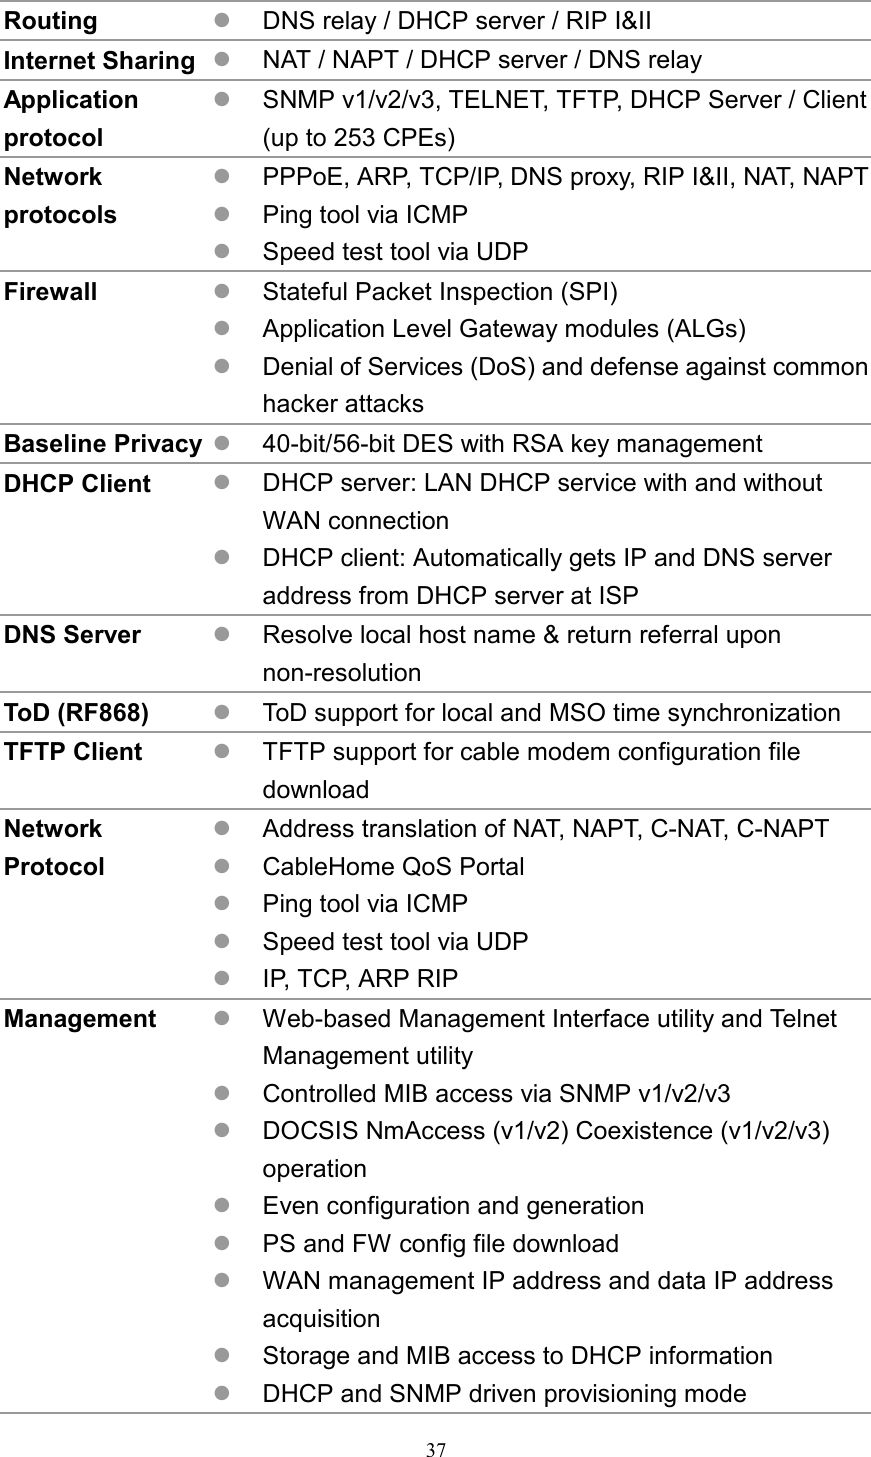 Software Specifications Routing    DNS relay / DHCP server / RIP I&amp;II Internet Sharing    NAT / NAPT / DHCP server / DNS relay Application protocol   SNMP v1/v2/v3, TELNET, TFTP, DHCP Server / Client (up to 253 CPEs) Network protocols    PPPoE, ARP, TCP/IP, DNS proxy, RIP I&amp;II, NAT, NAPT Ping tool via ICMP Speed test tool via UDP Firewall     Stateful Packet Inspection (SPI) Application Level Gateway modules (ALGs) Denial of Services (DoS) and defense against common hacker attacks Baseline Privacy    40-bit/56-bit DES with RSA key management DHCP Client    DHCP server: LAN DHCP service with and without WAN connection DHCP client: Automatically gets IP and DNS server address from DHCP server at ISP DNS Server    Resolve local host name &amp; return referral upon non-resolution ToD (RF868)    ToD support for local and MSO time synchronization TFTP Client    TFTP support for cable modem configuration file download Network Protocol      Address translation of NAT, NAPT, C-NAT, C-NAPT CableHome QoS Portal Ping tool via ICMP Speed test tool via UDP IP, TCP, ARP RIP Management          Web-based Management Interface utility and Telnet Management utility Controlled MIB access via SNMP v1/v2/v3 DOCSIS NmAccess (v1/v2) Coexistence (v1/v2/v3) operation Even configuration and generation PS and FW config file download WAN management IP address and data IP address acquisition Storage and MIB access to DHCP information DHCP and SNMP driven provisioning mode  37